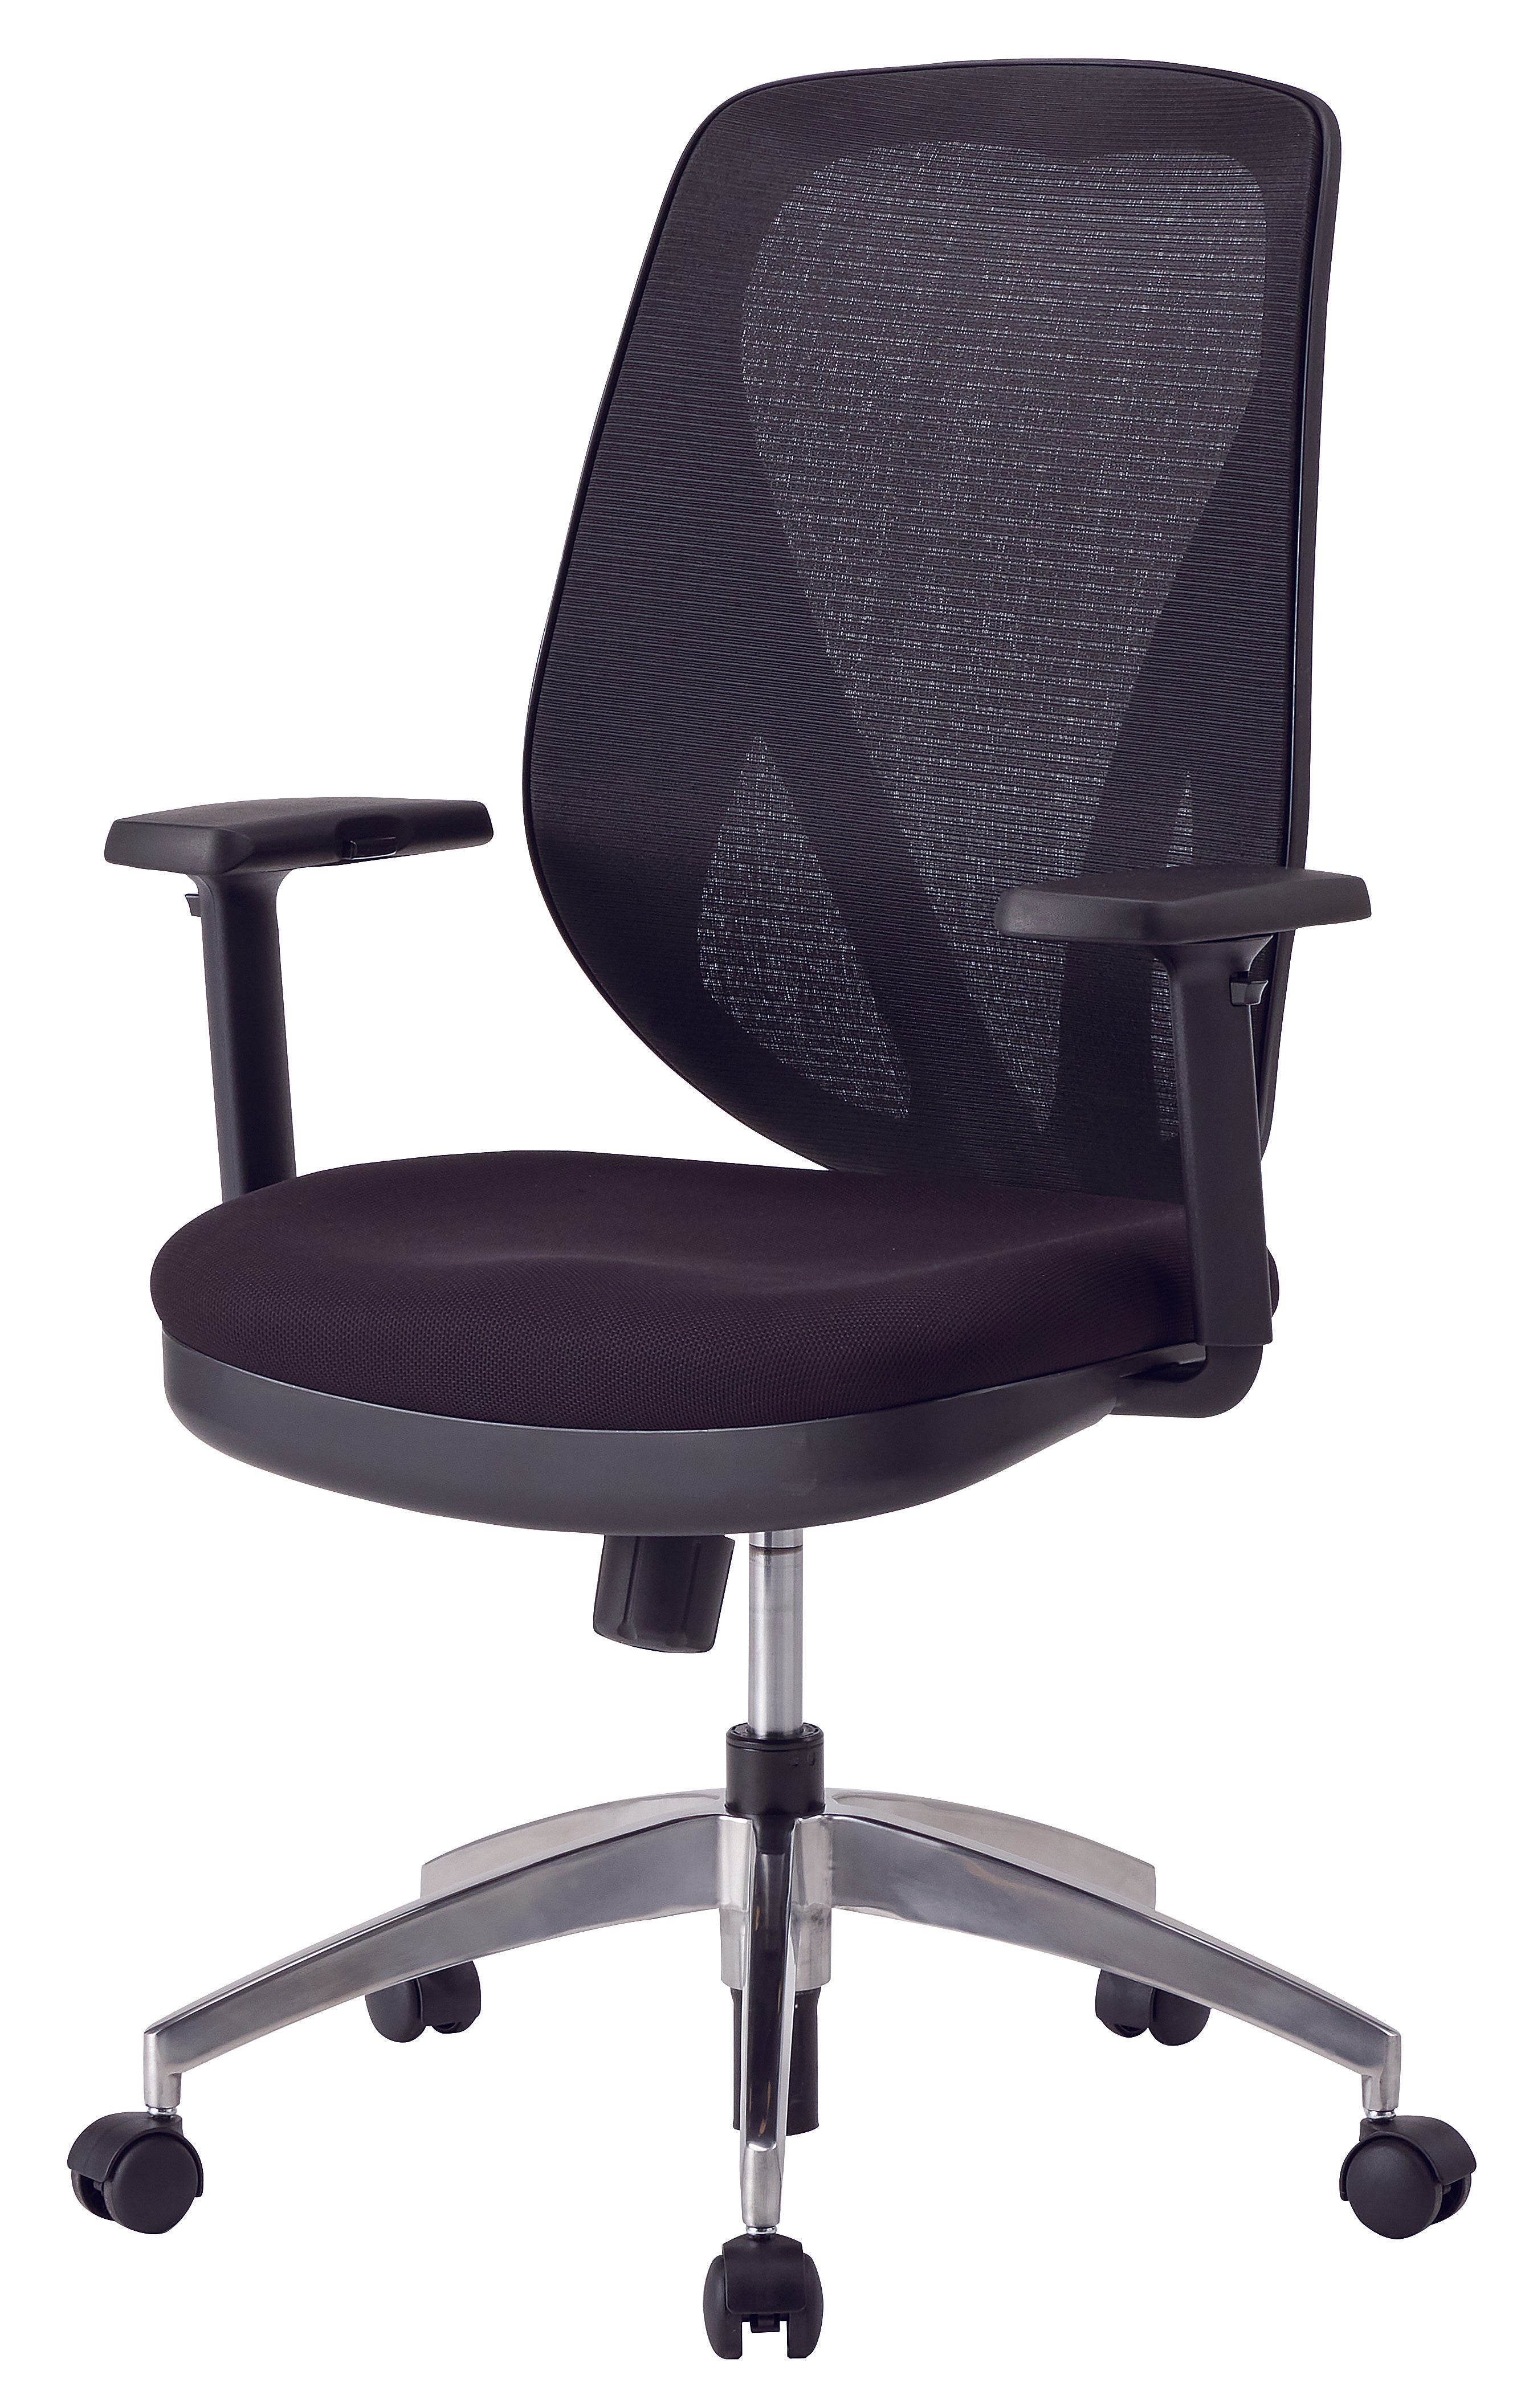 LAP Office Chair SPECIAL EDITION